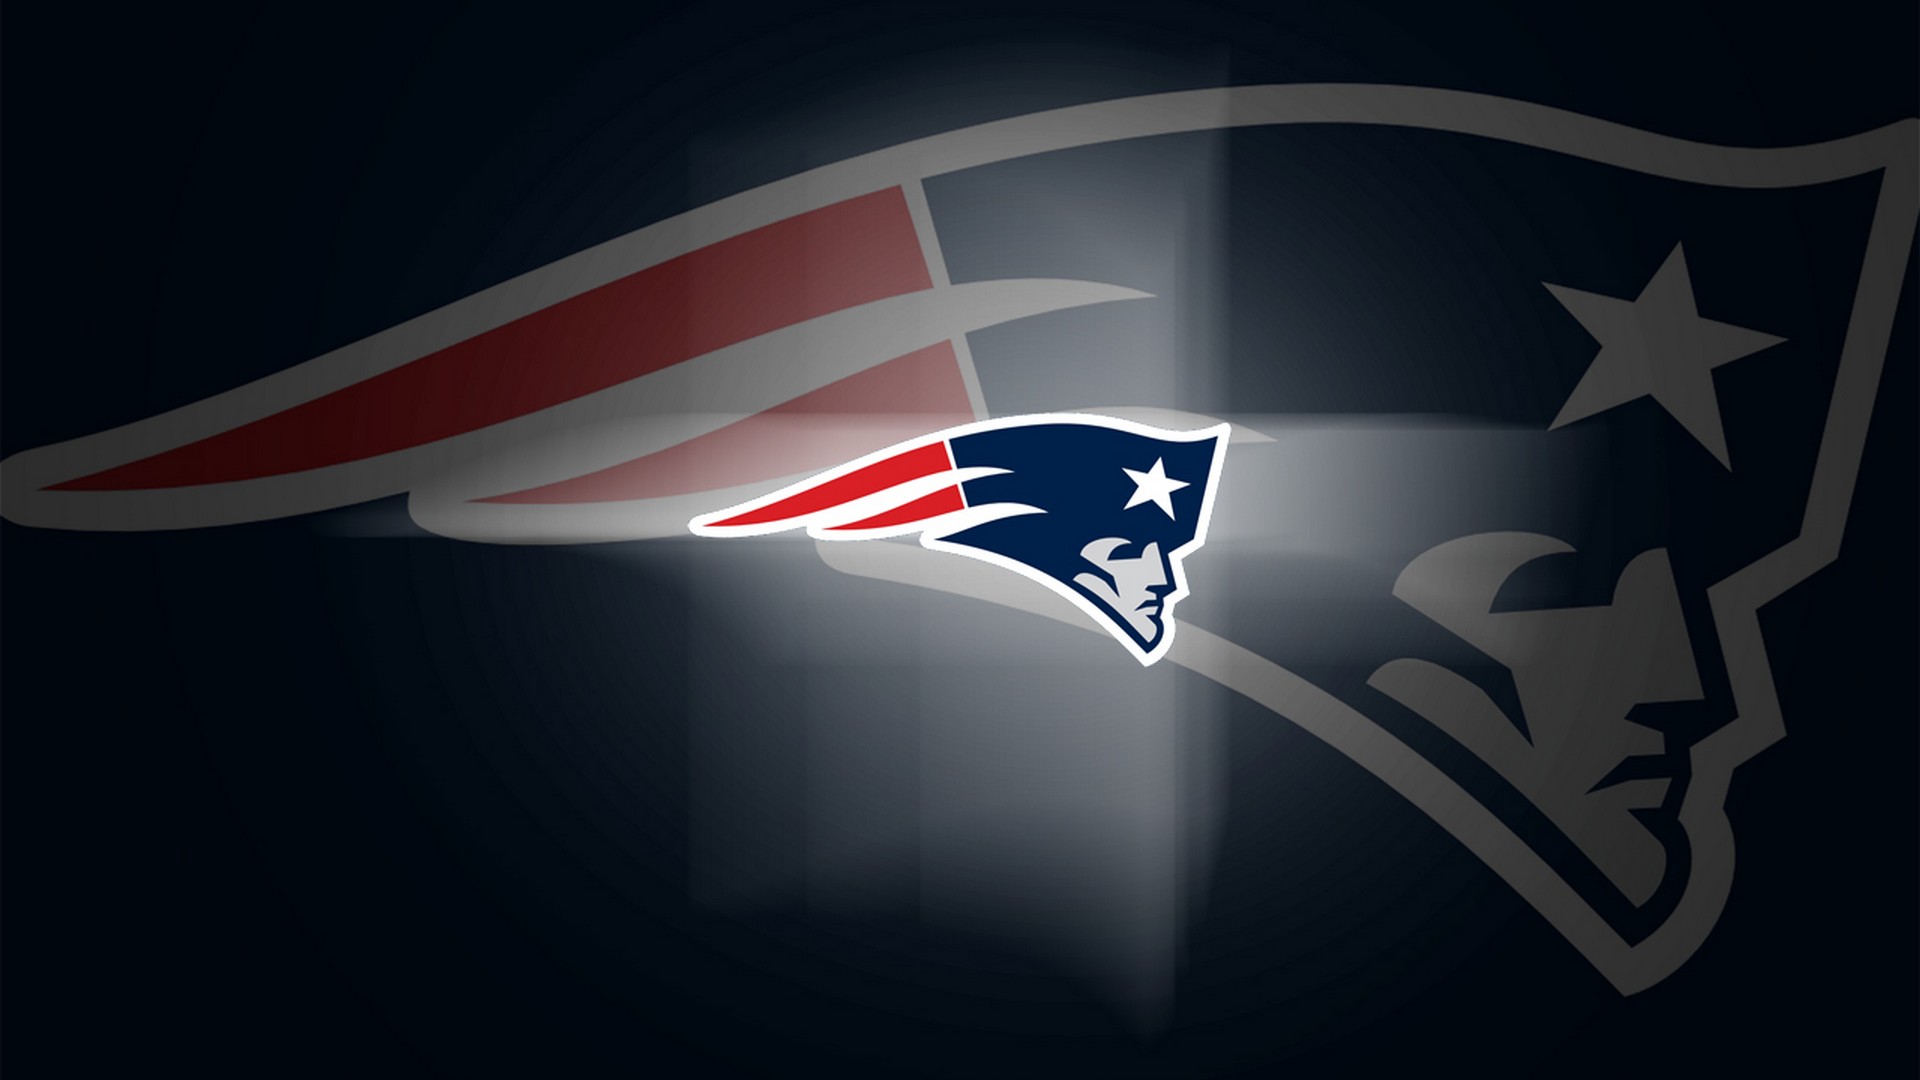 Wallpapers New England Patriots with resolution 1920x1080 pixel. You can make this wallpaper for your Mac or Windows Desktop Background, iPhone, Android or Tablet and another Smartphone device